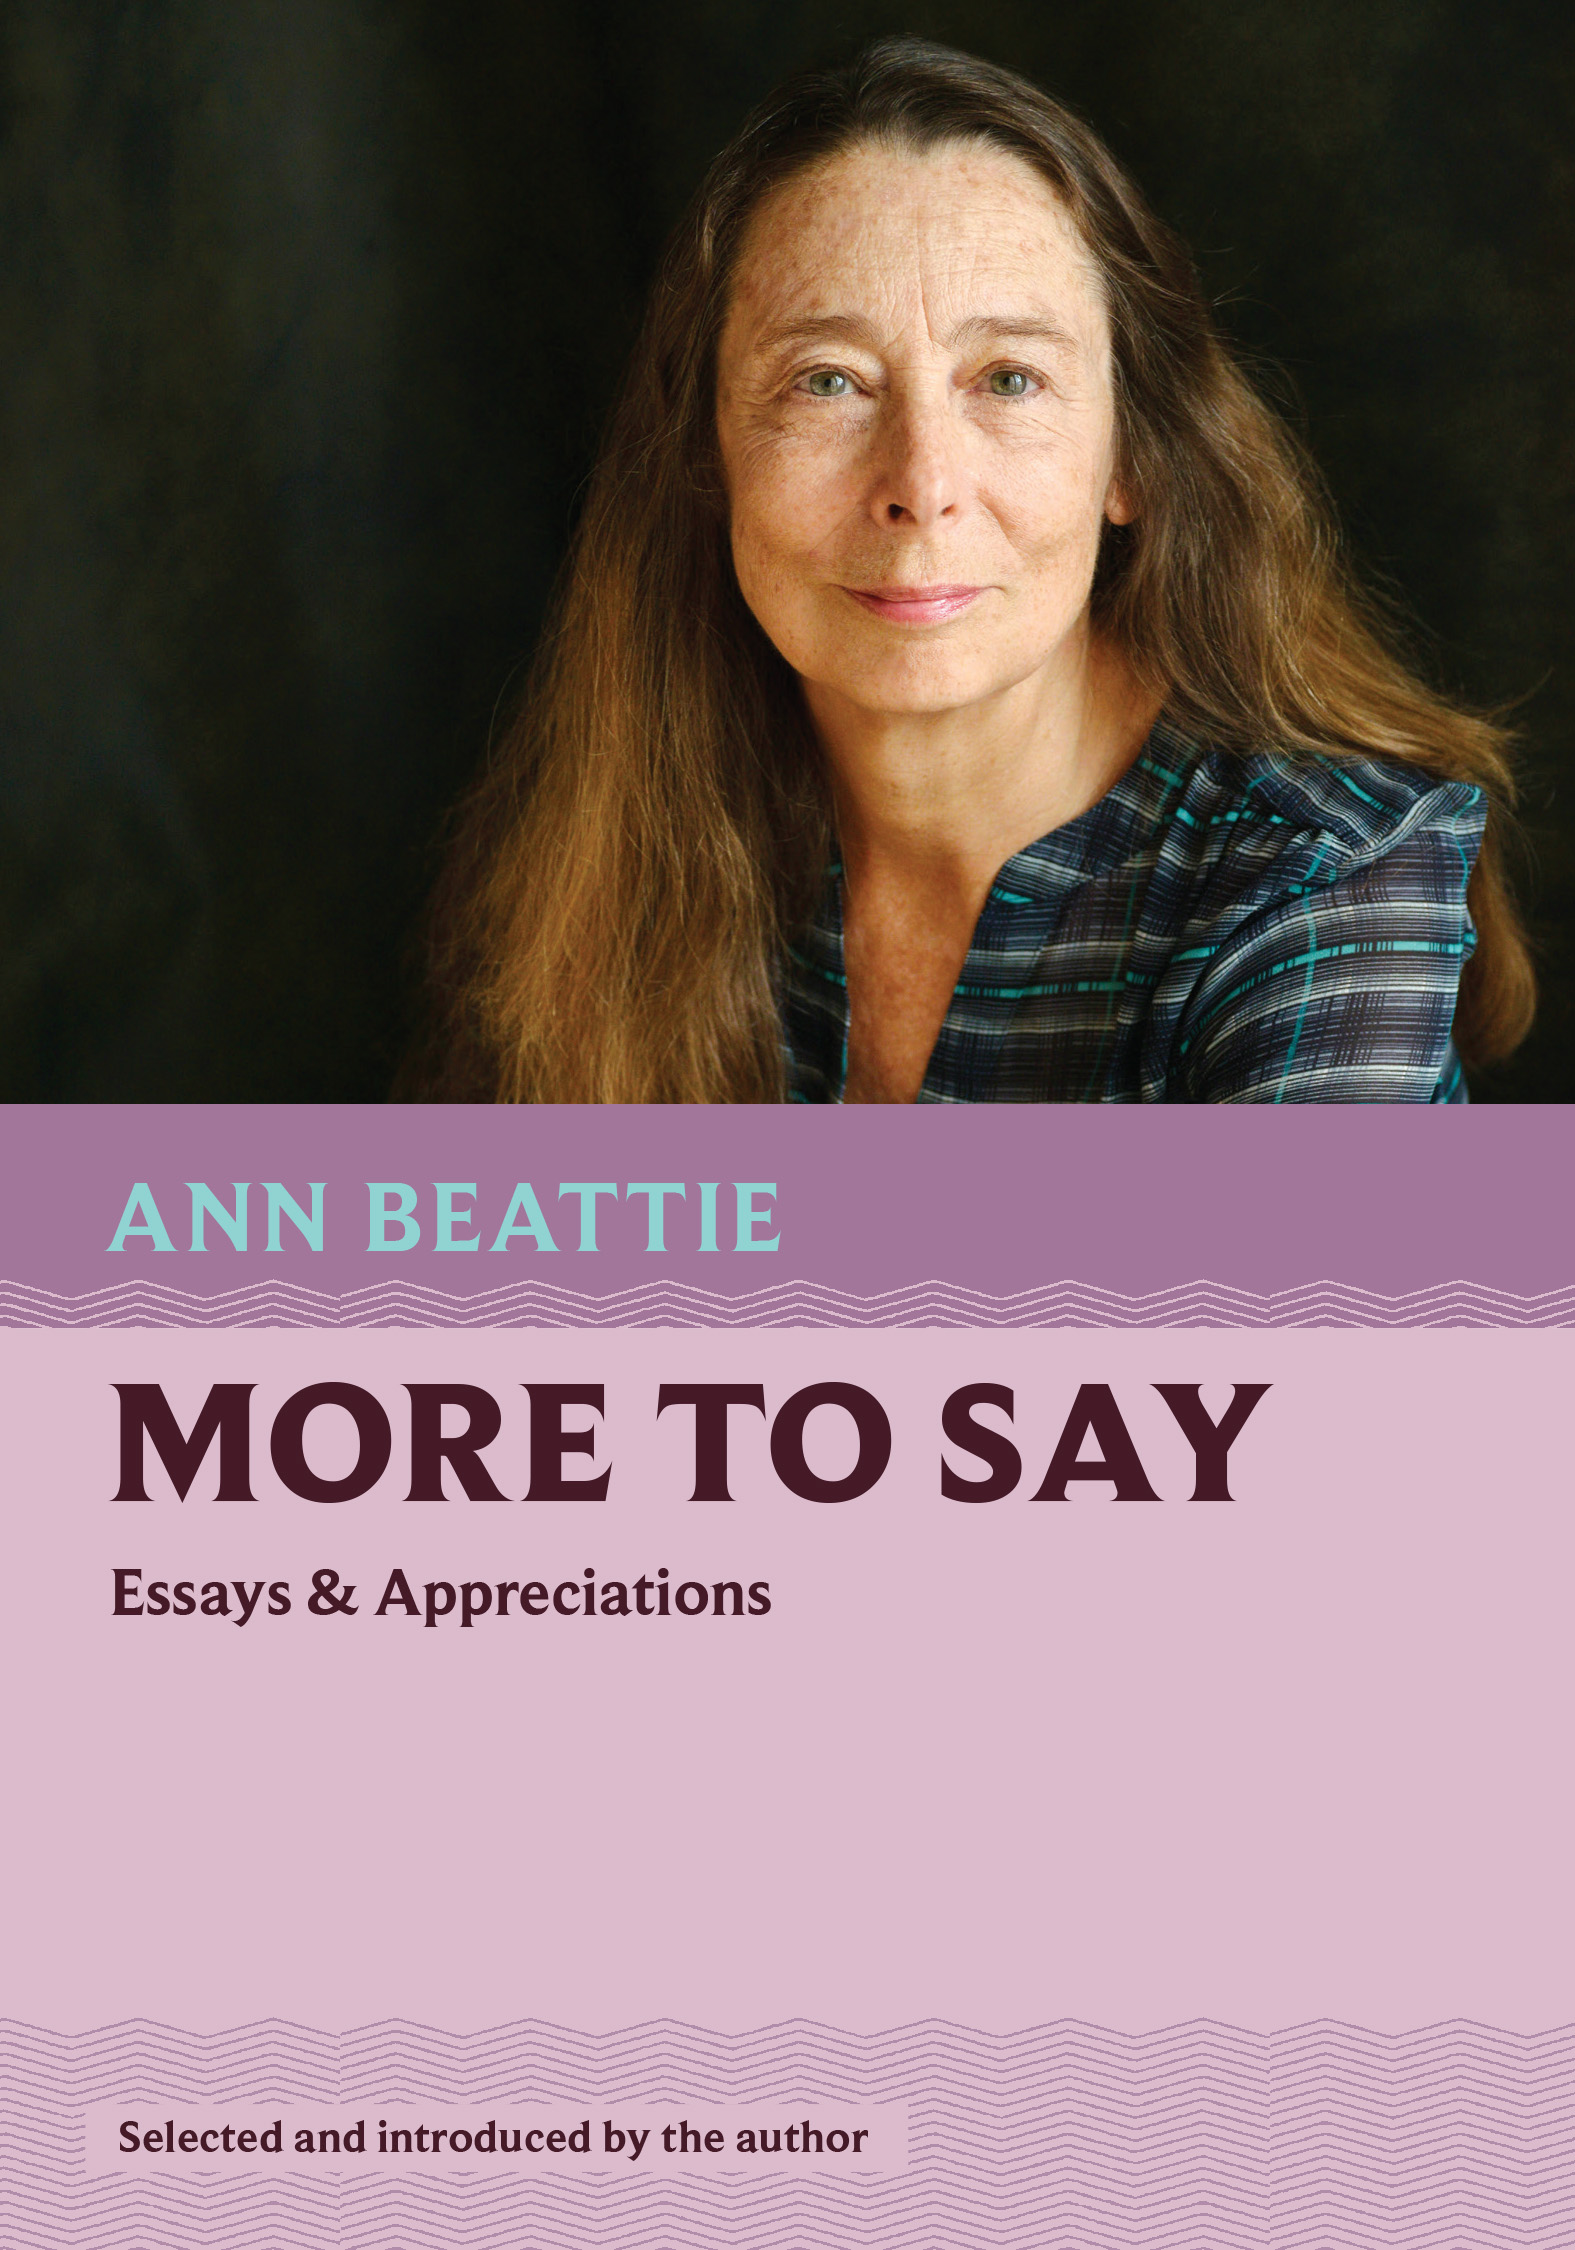 cover of more to say by ann beattie with photo of author